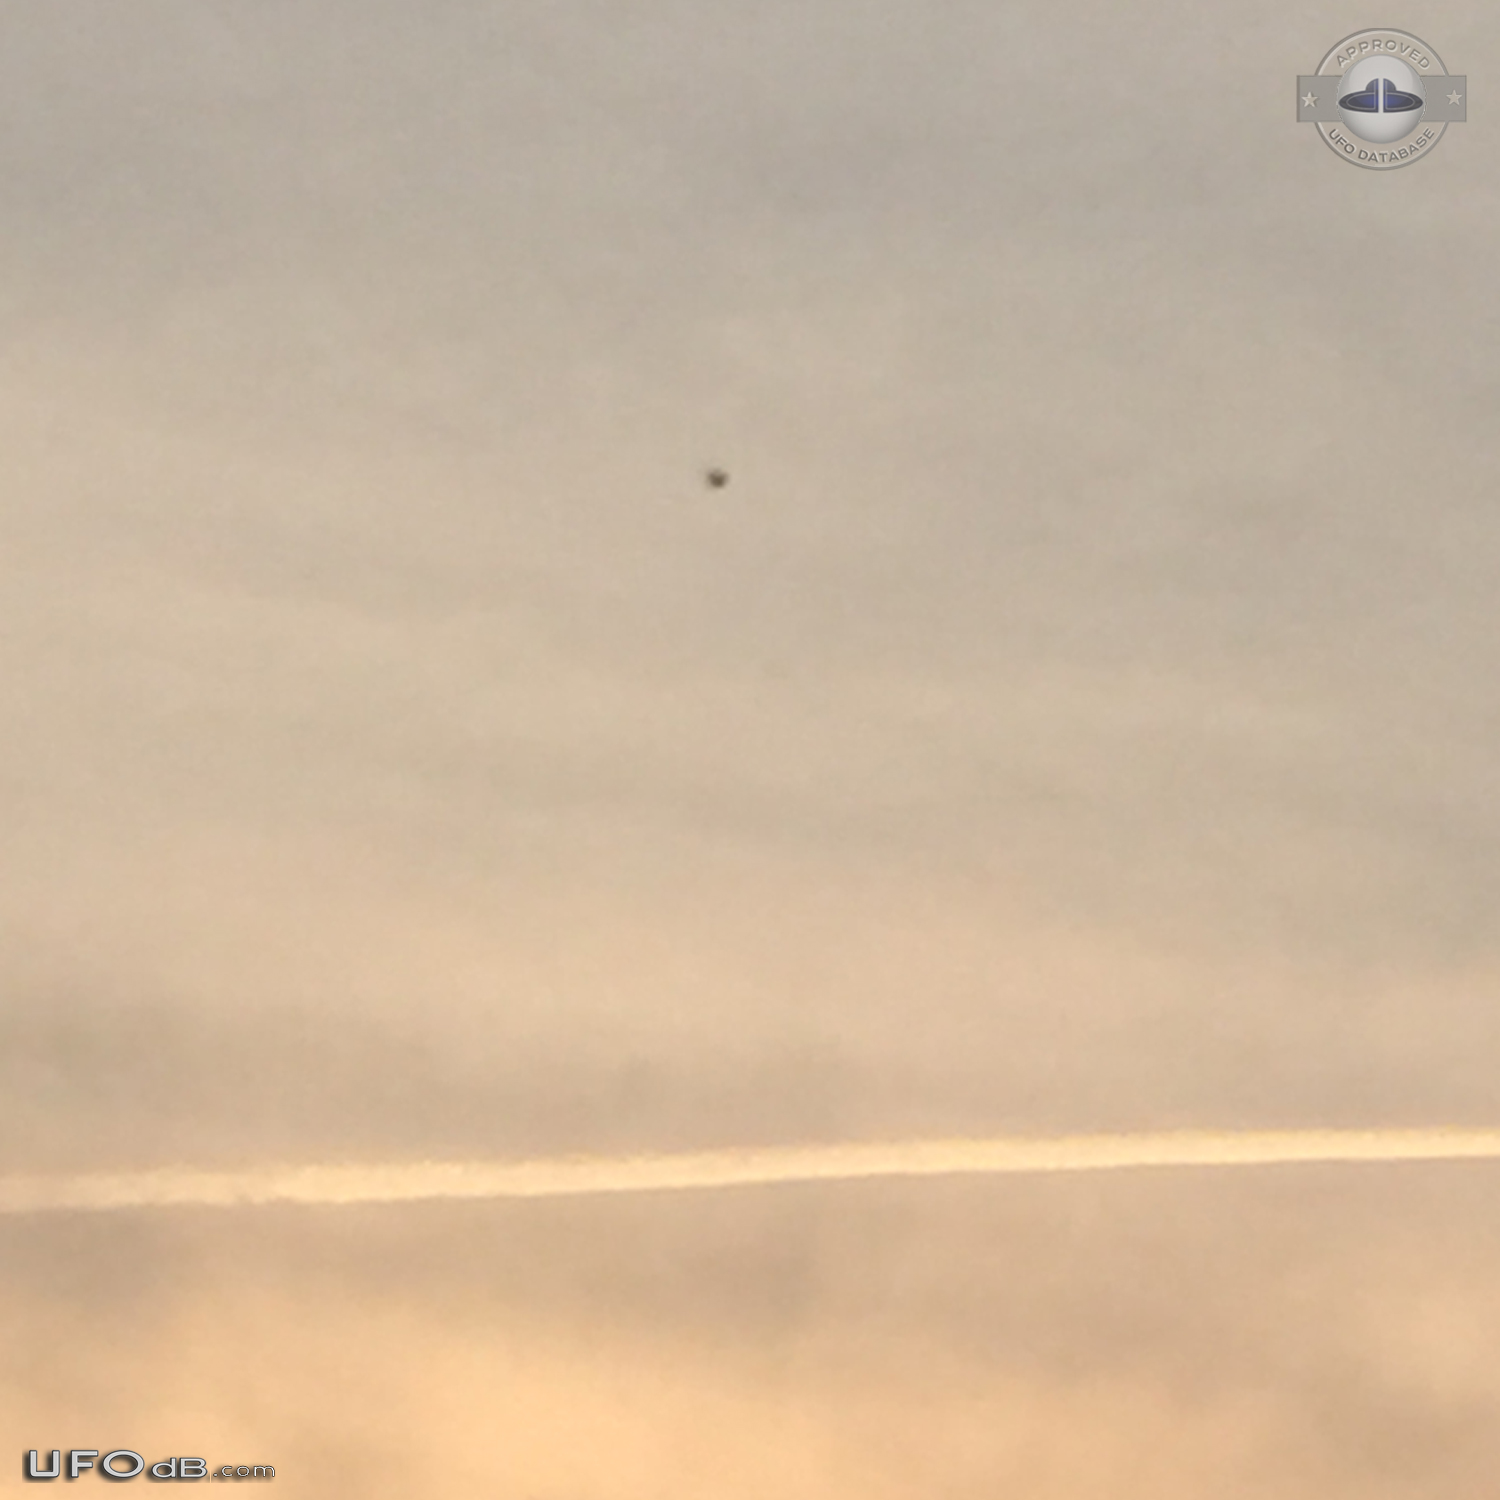 UFO on the 2nd of 3 consecutive photos - Edmonton Alberta Canada 2015 UFO Picture #717-3